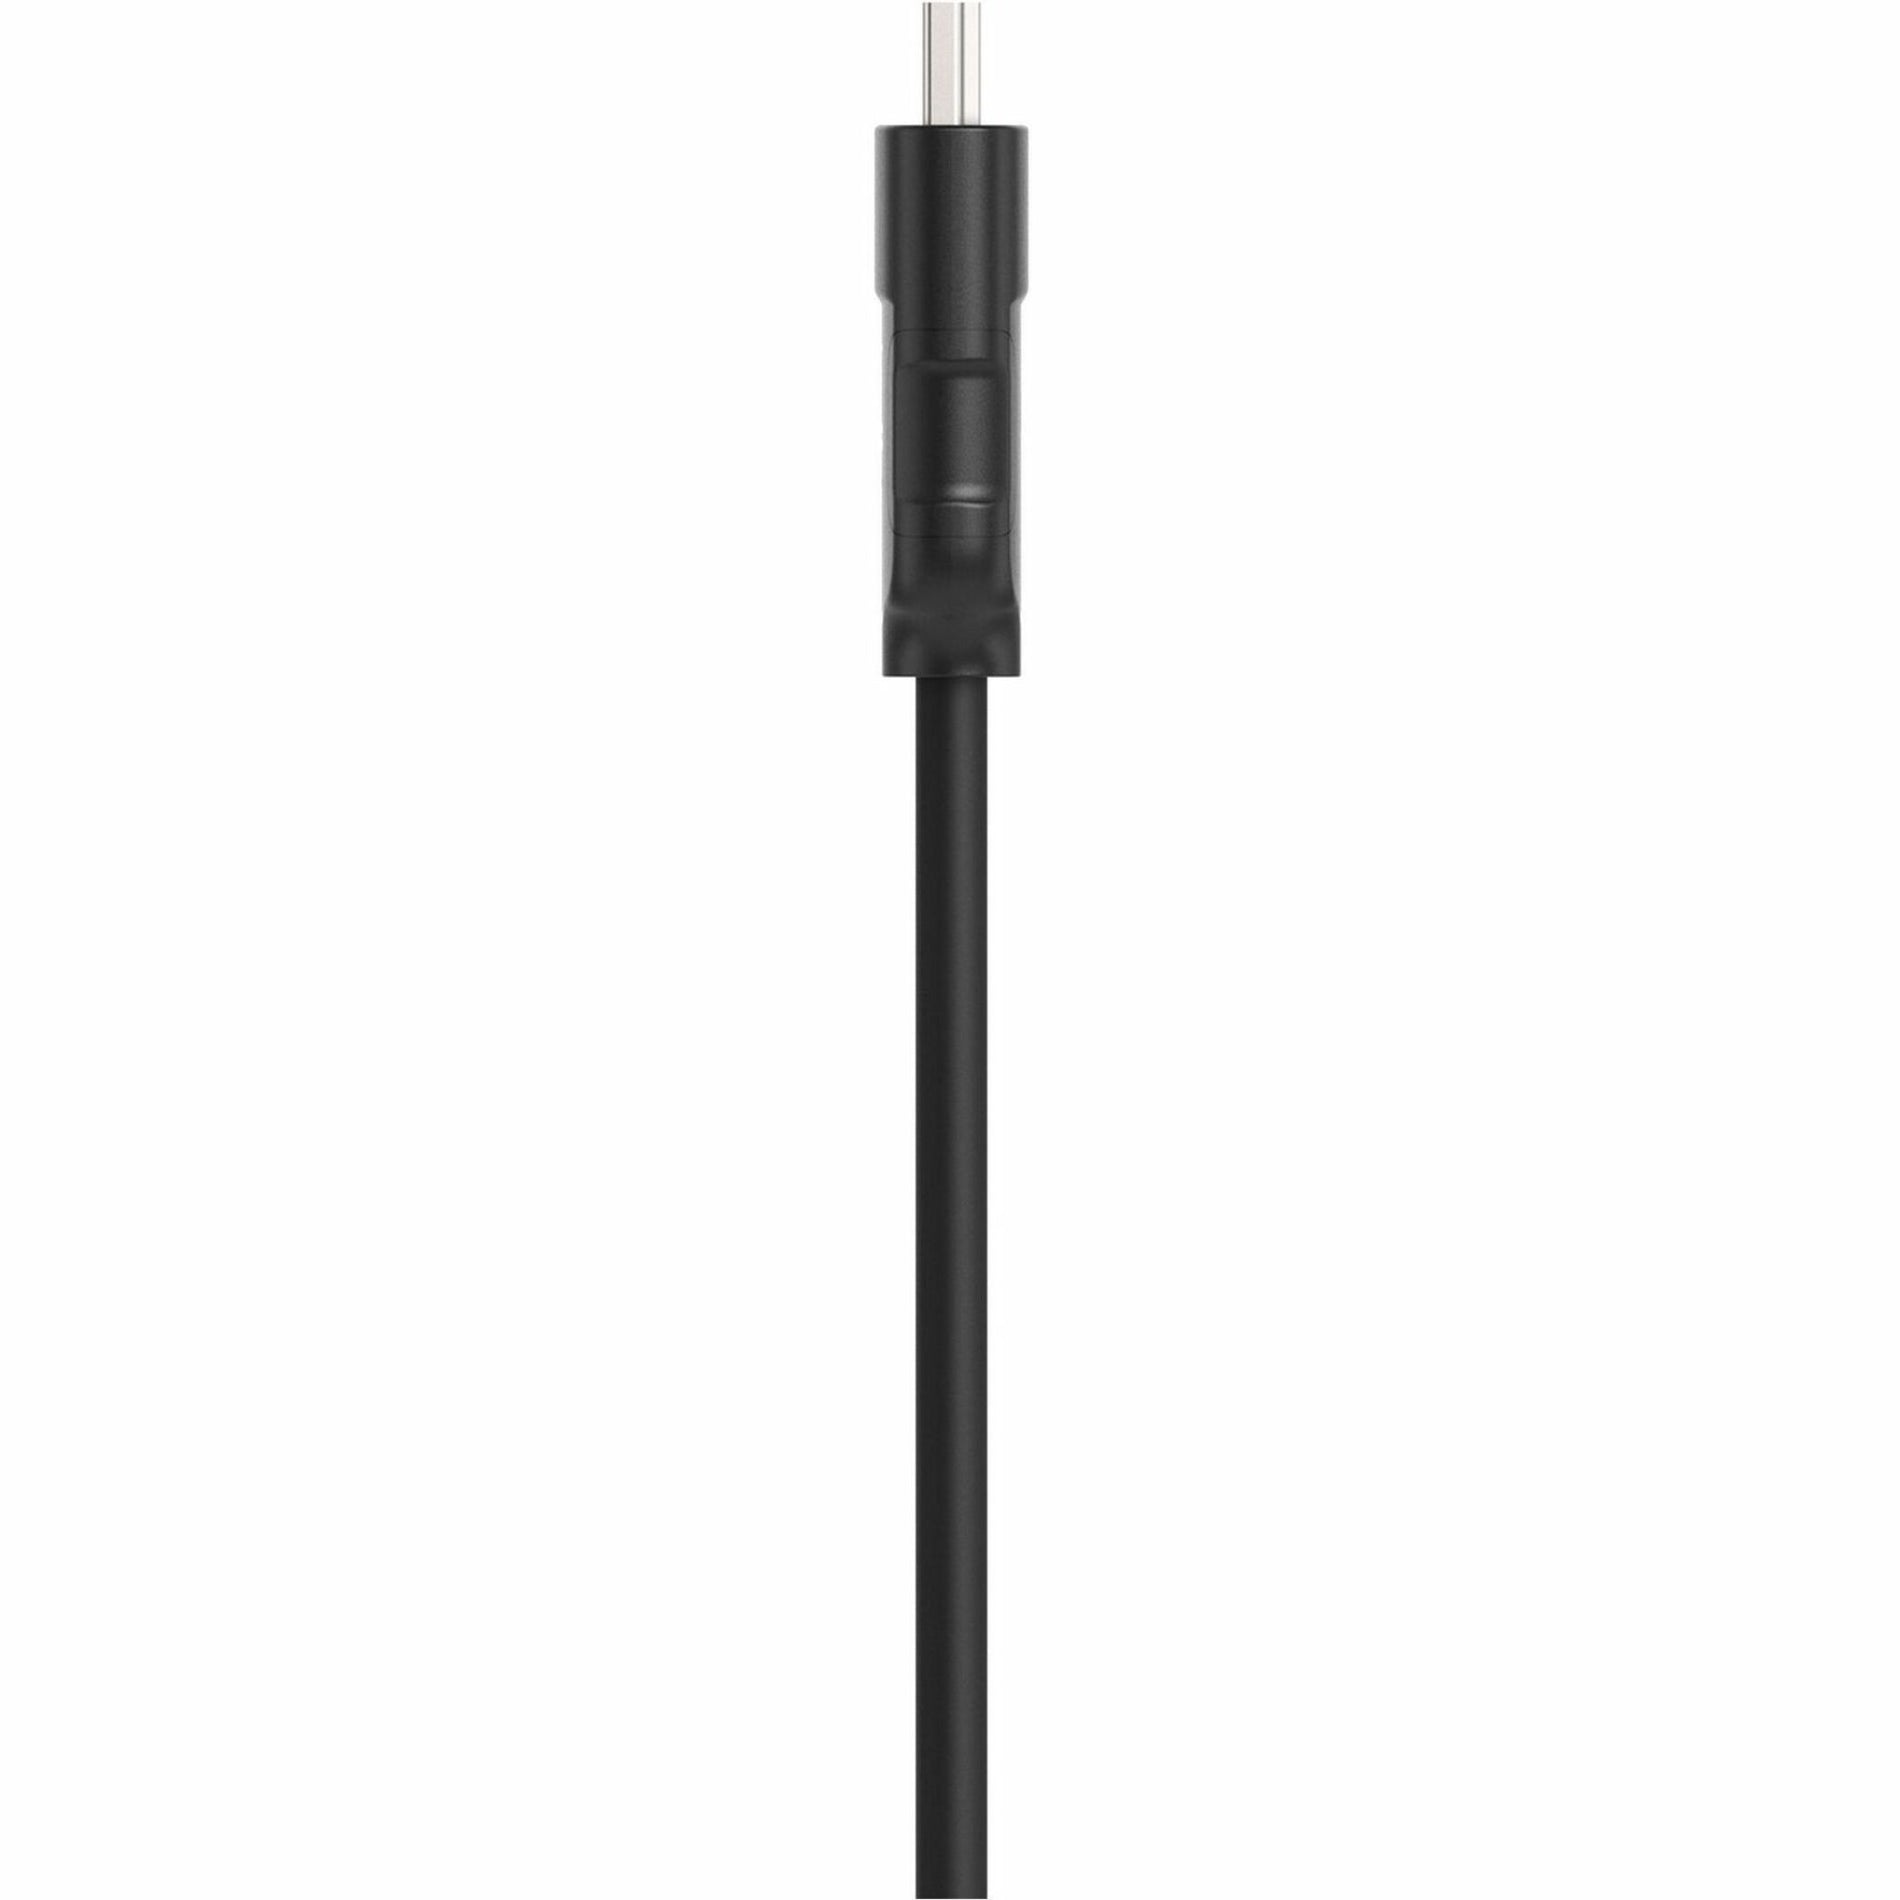 Belkin F8V3311b08 Audio/Video Cable, 8 ft HDMI Male to Male, Black